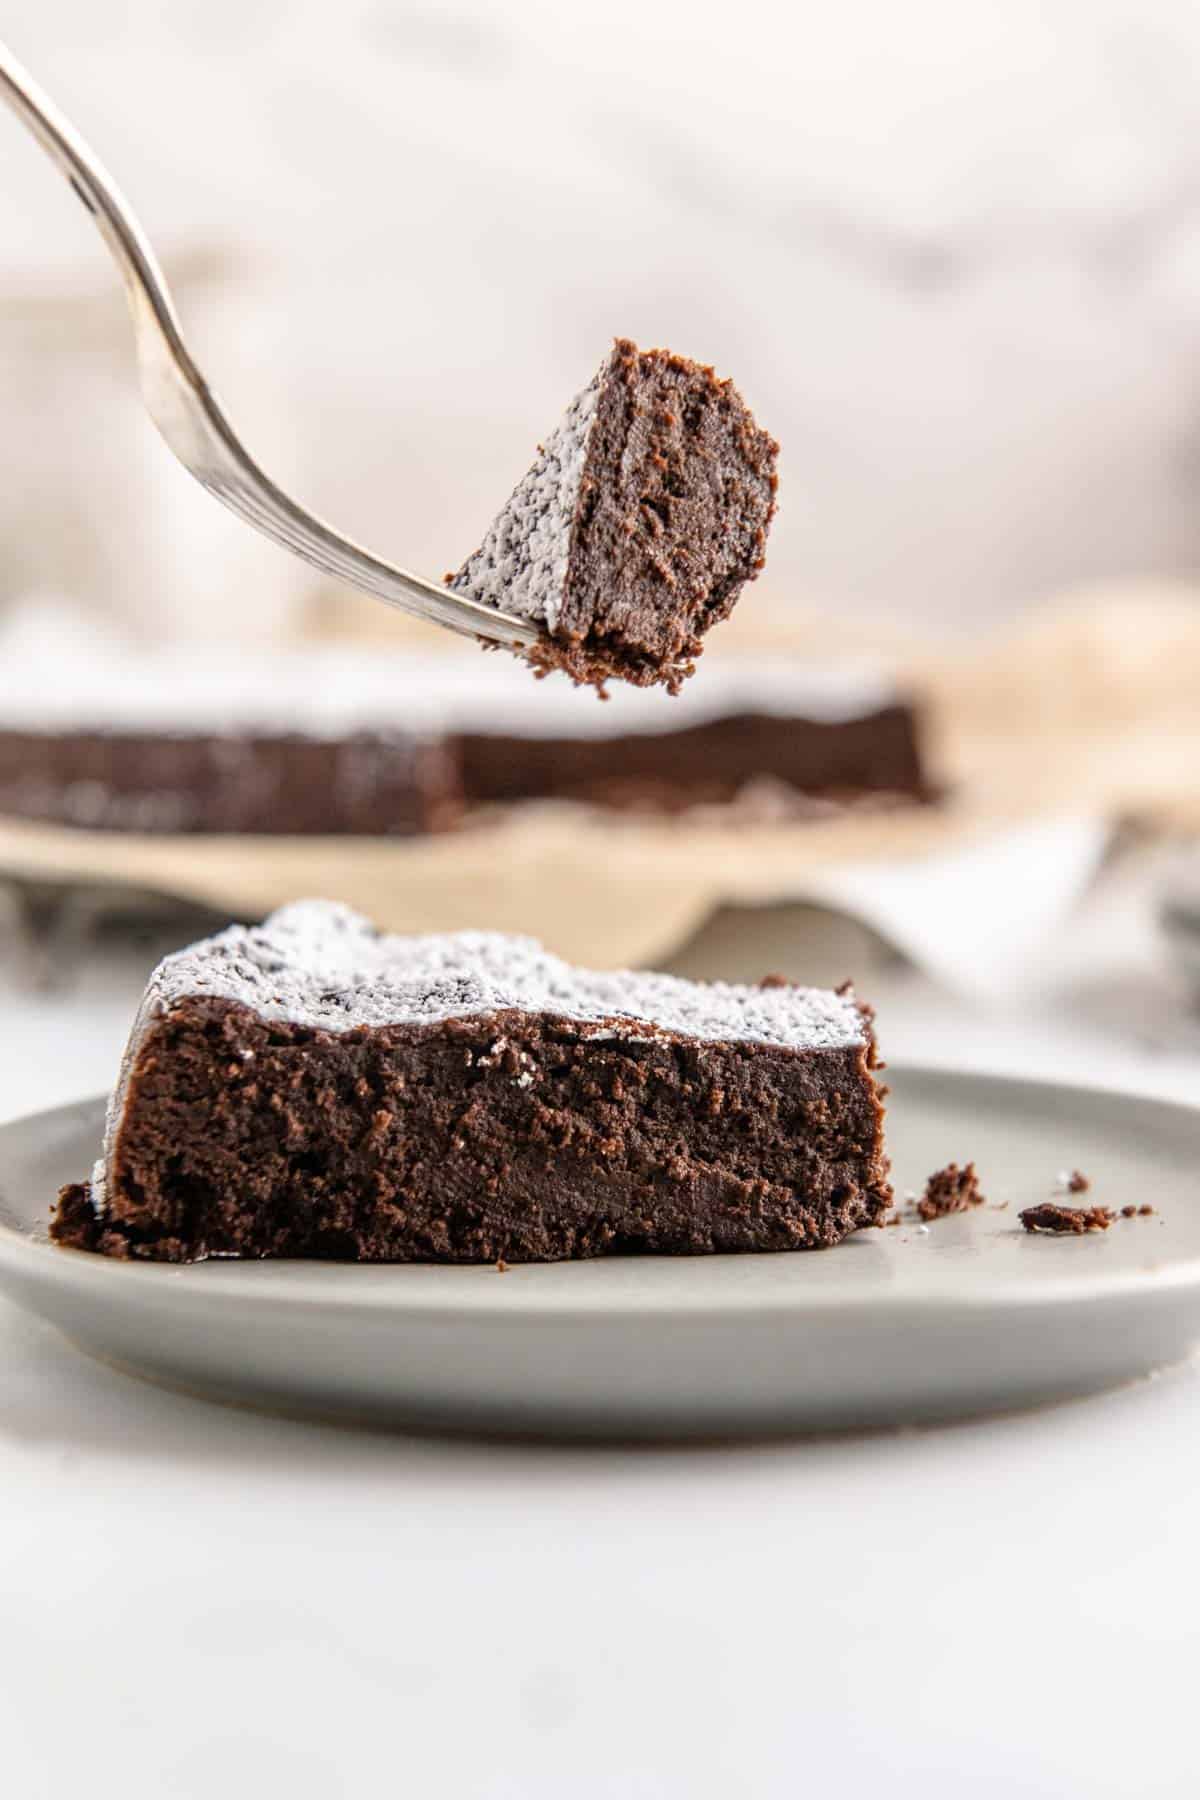 A forkful of chocolate torte held above a slice on a plate.